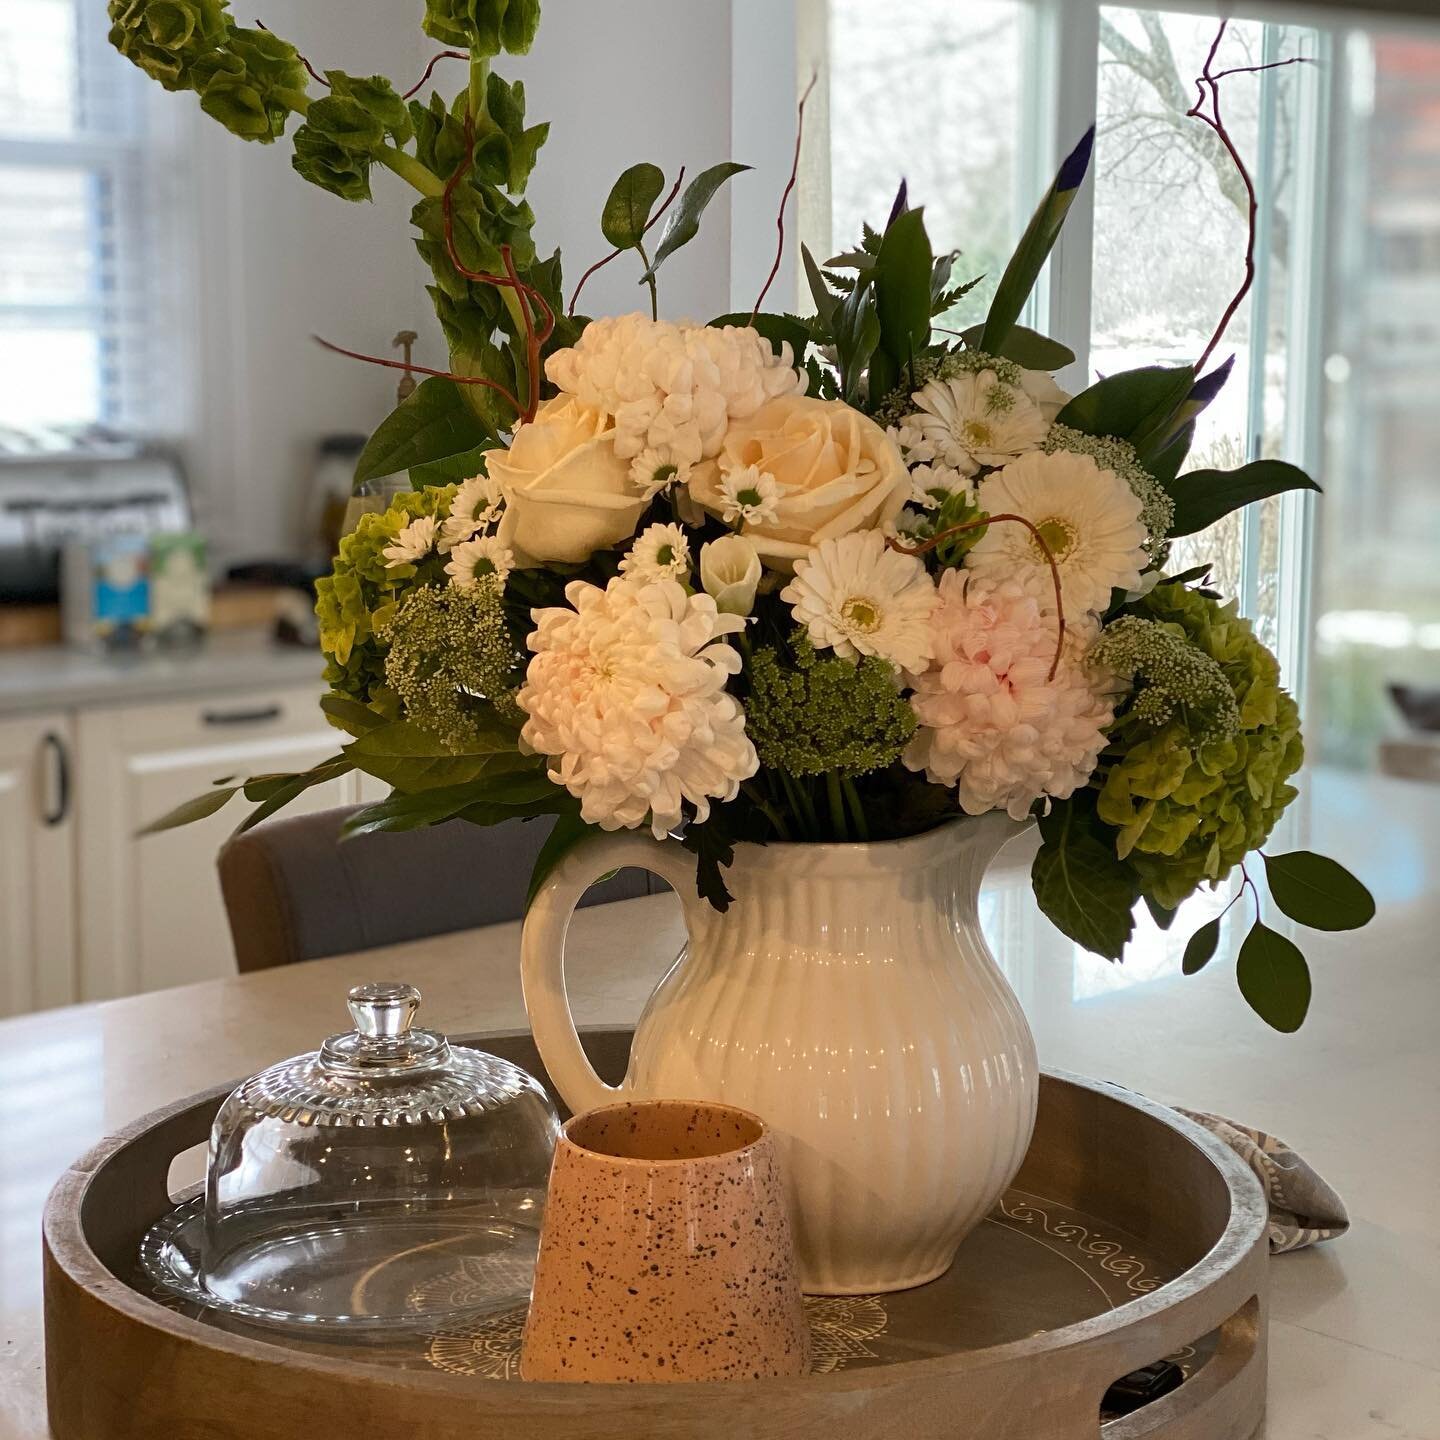 I received these gorgeous flowers from two amazing people. @quinnsblooms.greenery you have such a talented team. They are making me smile. Thank you #flowers #grateful #feelingthelove #shoplocal #giftofflowers #feelingspecial